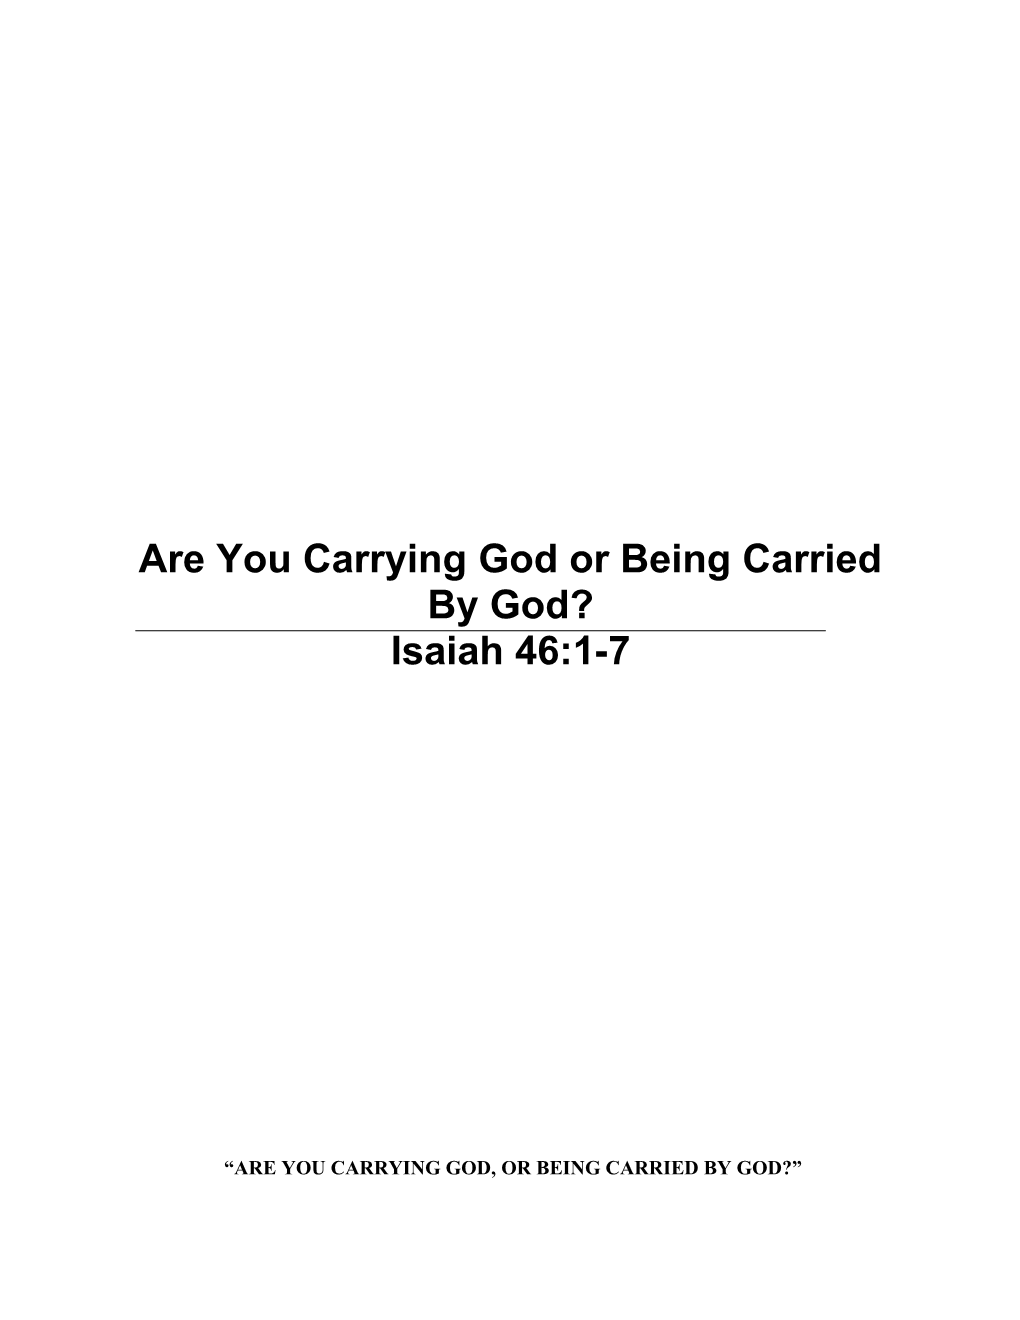 Are You Carrying God, Or Being Carried by God